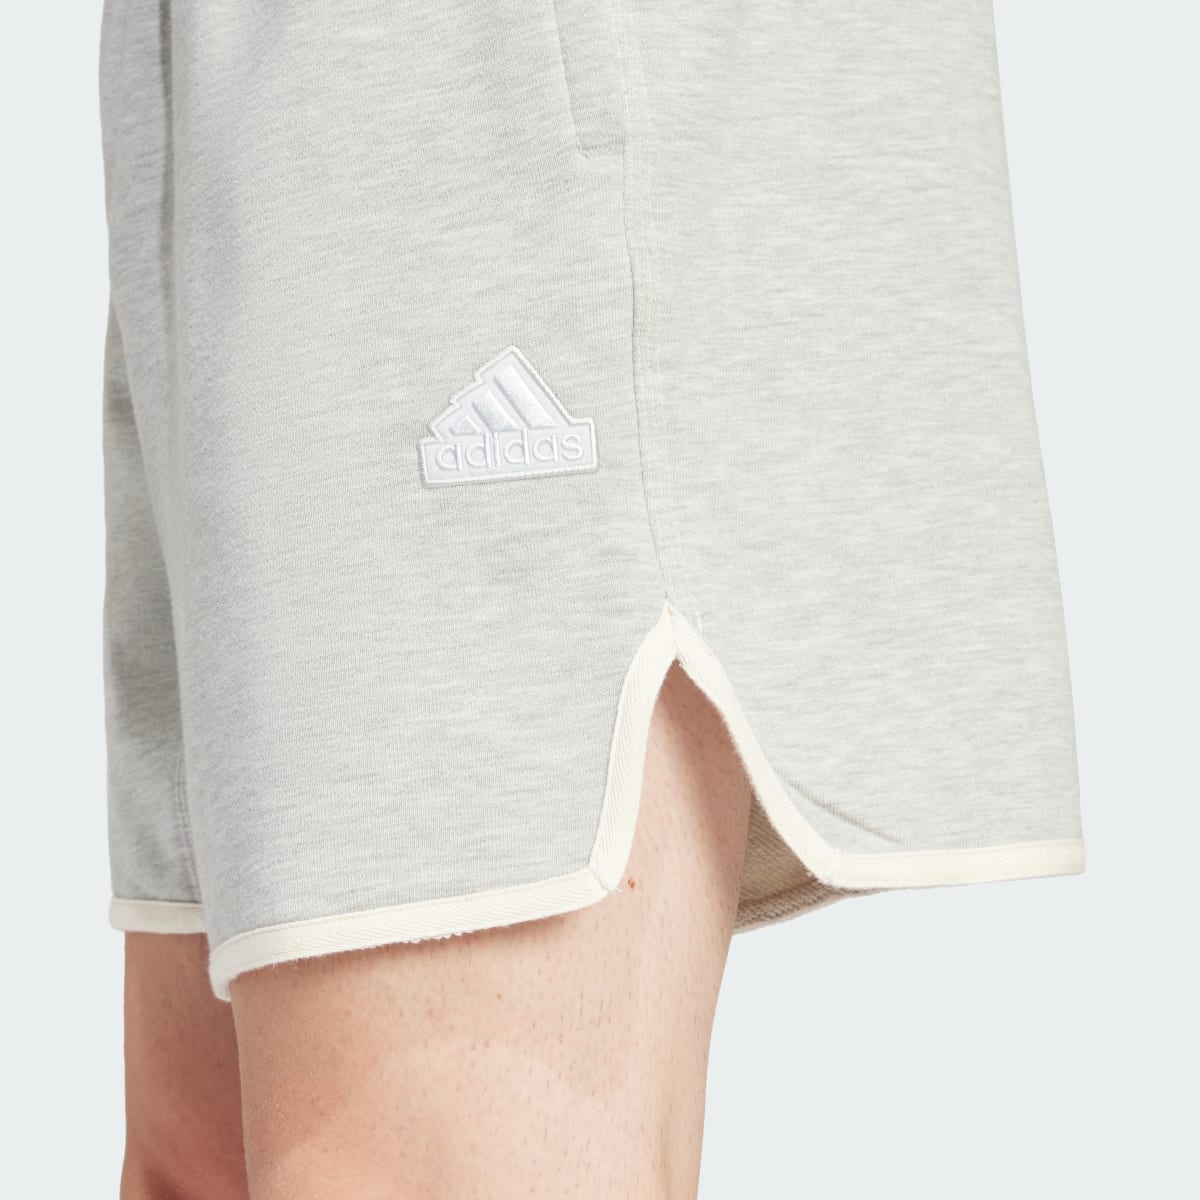 Adidas Lounge French Terry Colored Mélange Shorts. 6